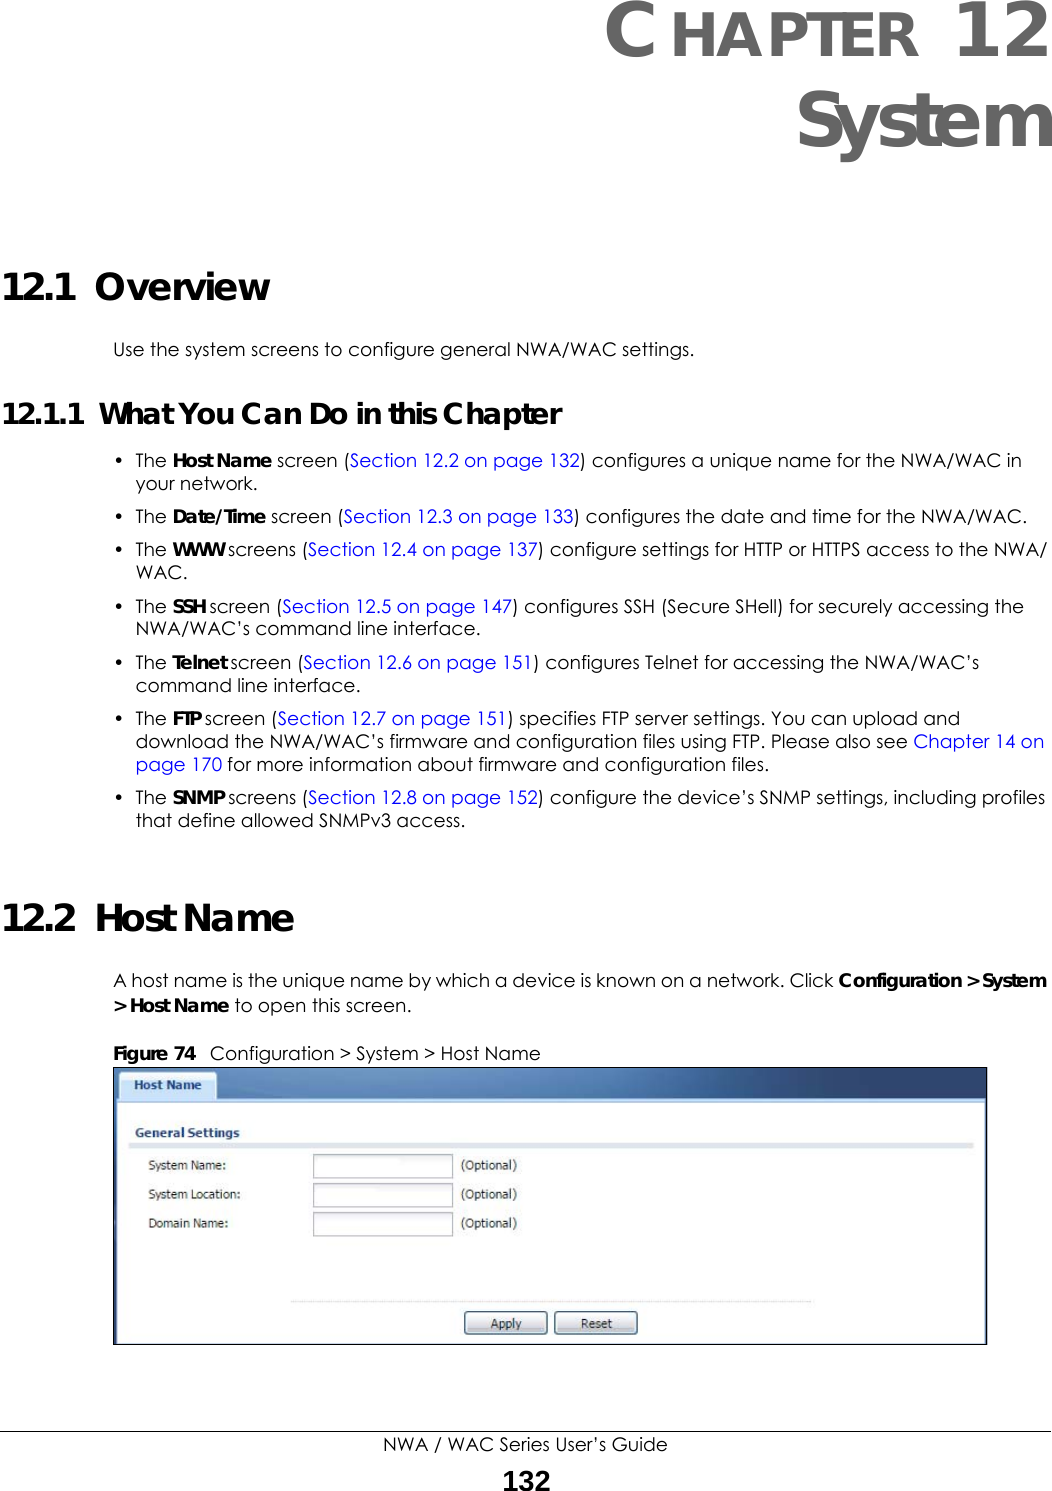 NWA / WAC Series User’s Guide132CHAPTER 12System12.1  OverviewUse the system screens to configure general NWA/WAC settings. 12.1.1  What You Can Do in this Chapter•The Host Name screen (Section 12.2 on page 132) configures a unique name for the NWA/WAC in your network.• The Date/Time screen (Section 12.3 on page 133) configures the date and time for the NWA/WAC.• The WWW screens (Section 12.4 on page 137) configure settings for HTTP or HTTPS access to the NWA/WAC. • The SSH screen (Section 12.5 on page 147) configures SSH (Secure SHell) for securely accessing the NWA/WAC’s command line interface. • The Telnet screen (Section 12.6 on page 151) configures Telnet for accessing the NWA/WAC’s command line interface. •The FTP screen (Section 12.7 on page 151) specifies FTP server settings. You can upload and download the NWA/WAC’s firmware and configuration files using FTP. Please also see Chapter 14 on page 170 for more information about firmware and configuration files.• The SNMP screens (Section 12.8 on page 152) configure the device’s SNMP settings, including profiles that define allowed SNMPv3 access.12.2  Host NameA host name is the unique name by which a device is known on a network. Click Configuration &gt; System &gt; Host Name to open this screen.Figure 74   Configuration &gt; System &gt; Host Name